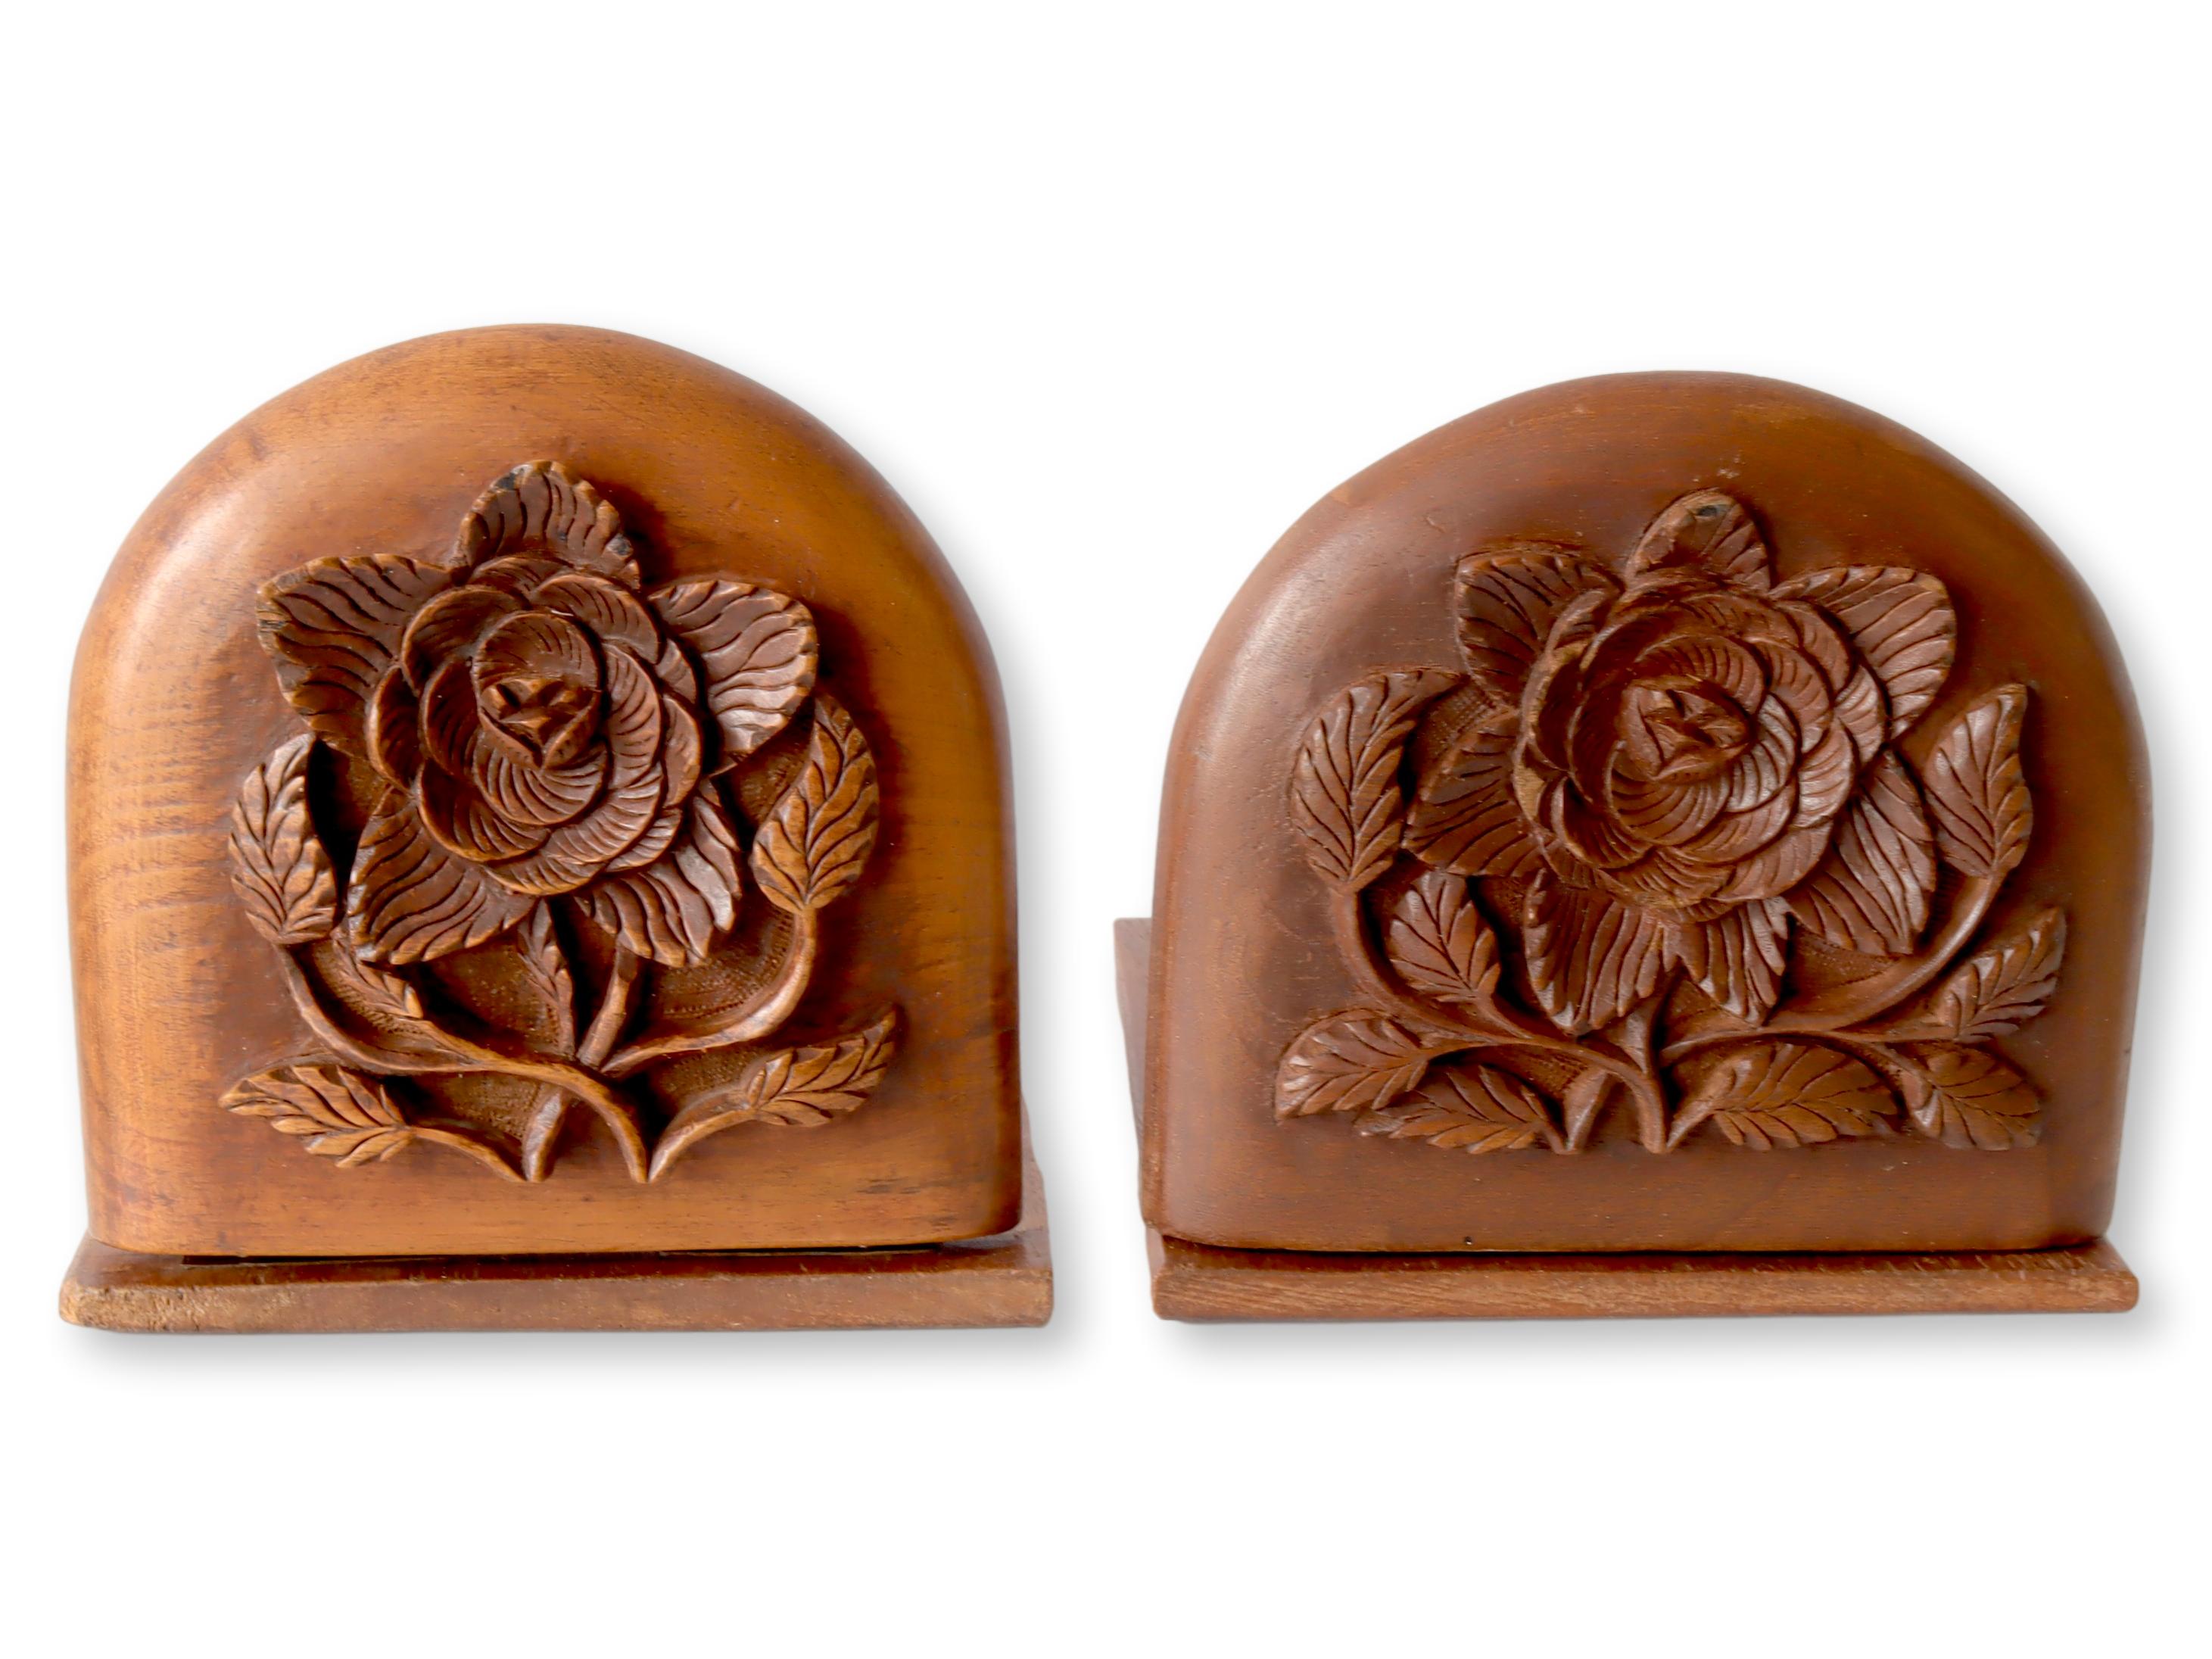 Midcentury Teak Floral Bookends, a Pair